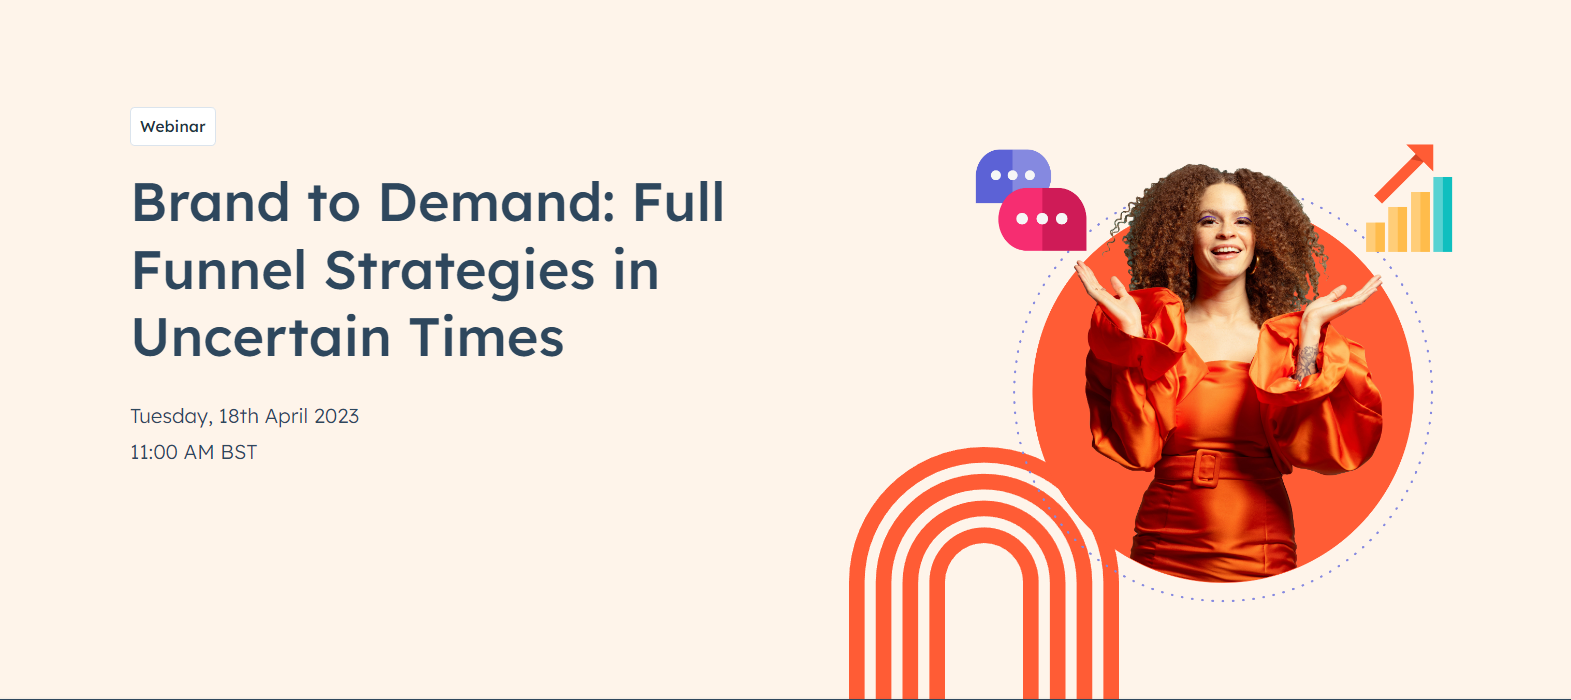 Brand to Demand: Full Funnel Strategies in Uncertain Times